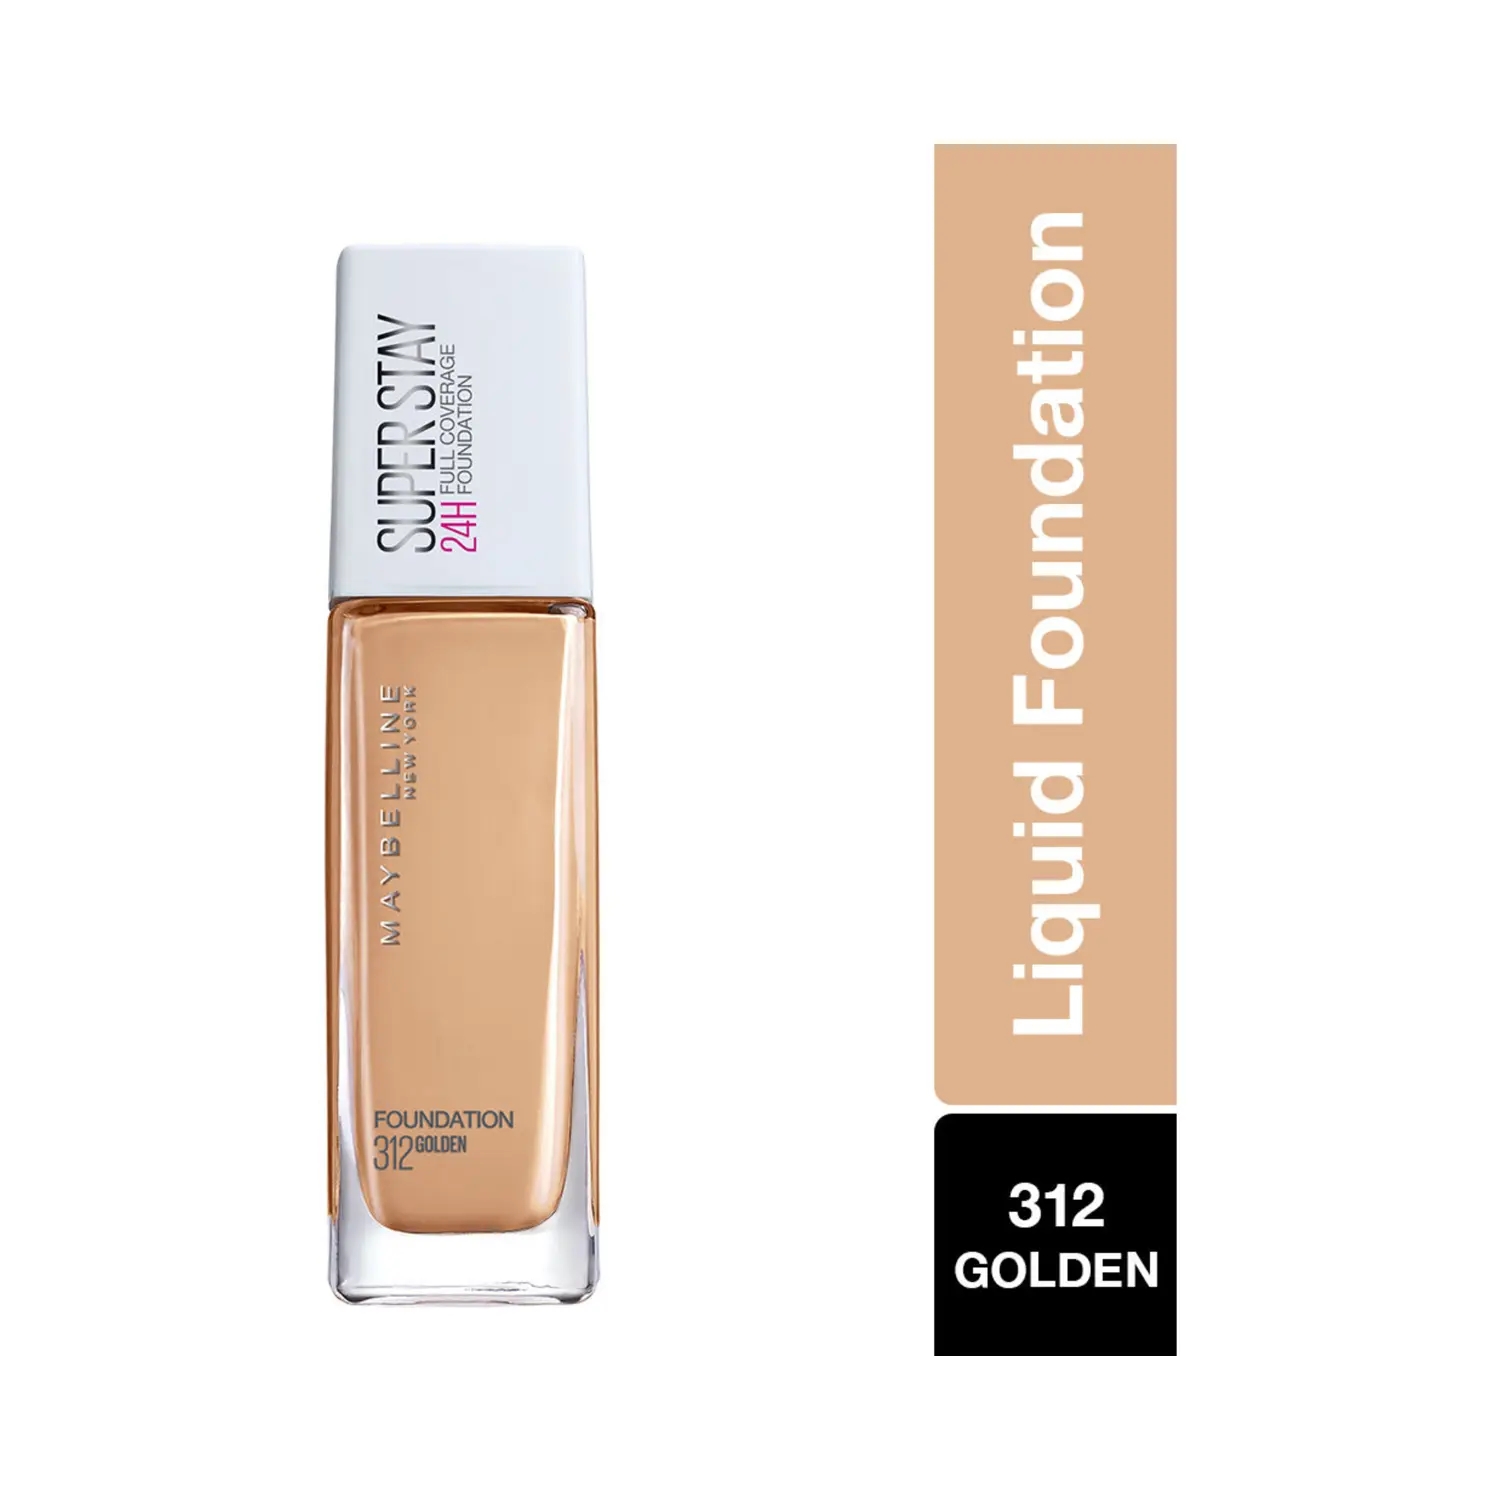 New Super Ivory Full Maybelline Natural Foundation 112 Coverage Liquid 24H York (30ml) Stay -